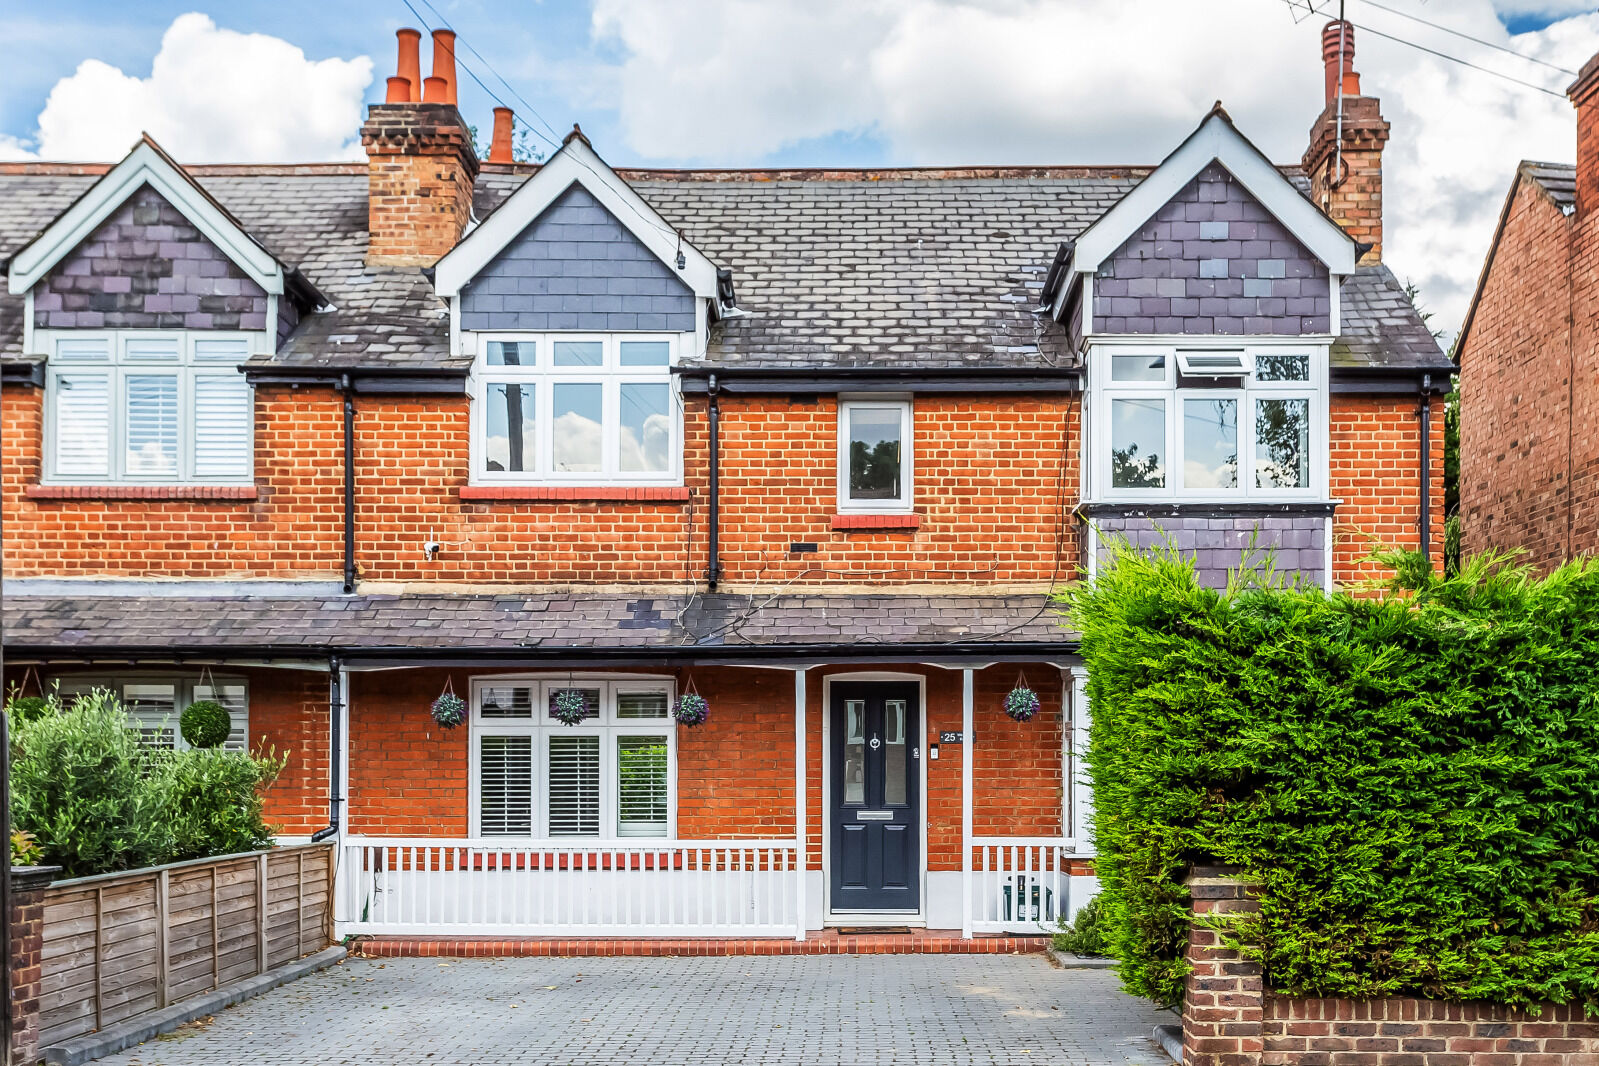 4 bedroom semi detached house for sale Western Road, Sutton, SM1, main image